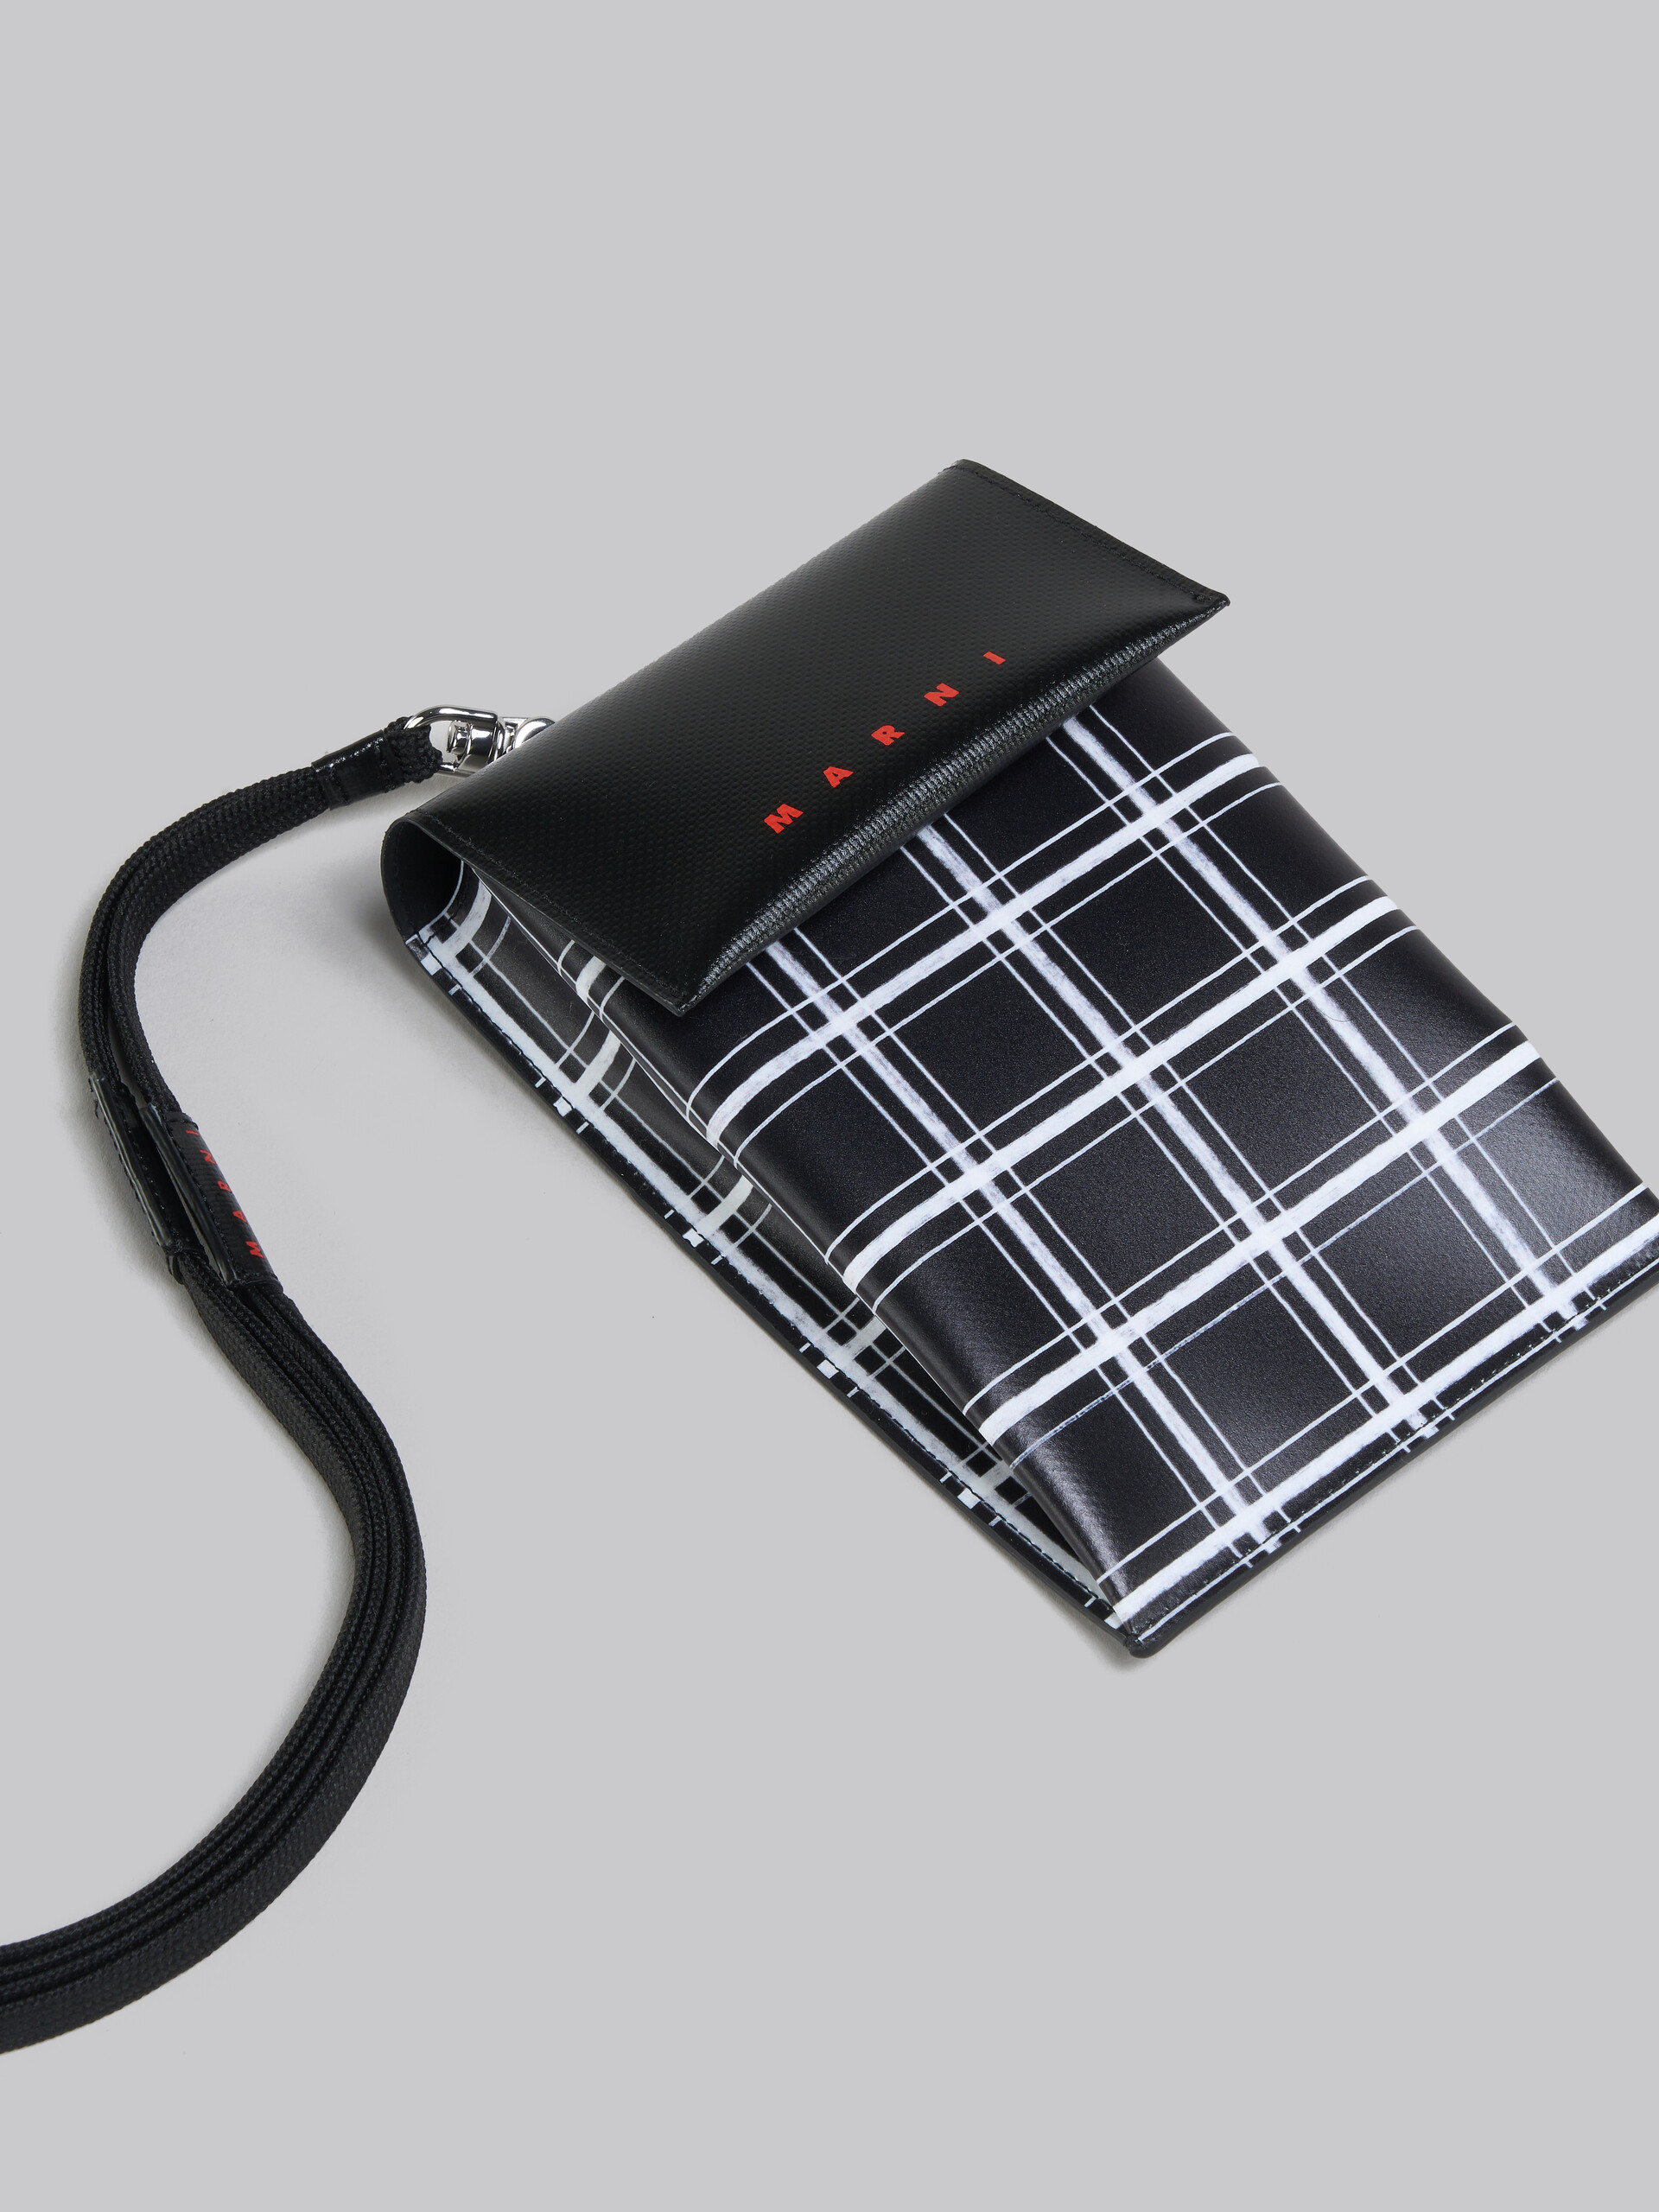 Black and white checked Tribeca phone case - Wallets and Small Leather Goods - Image 5